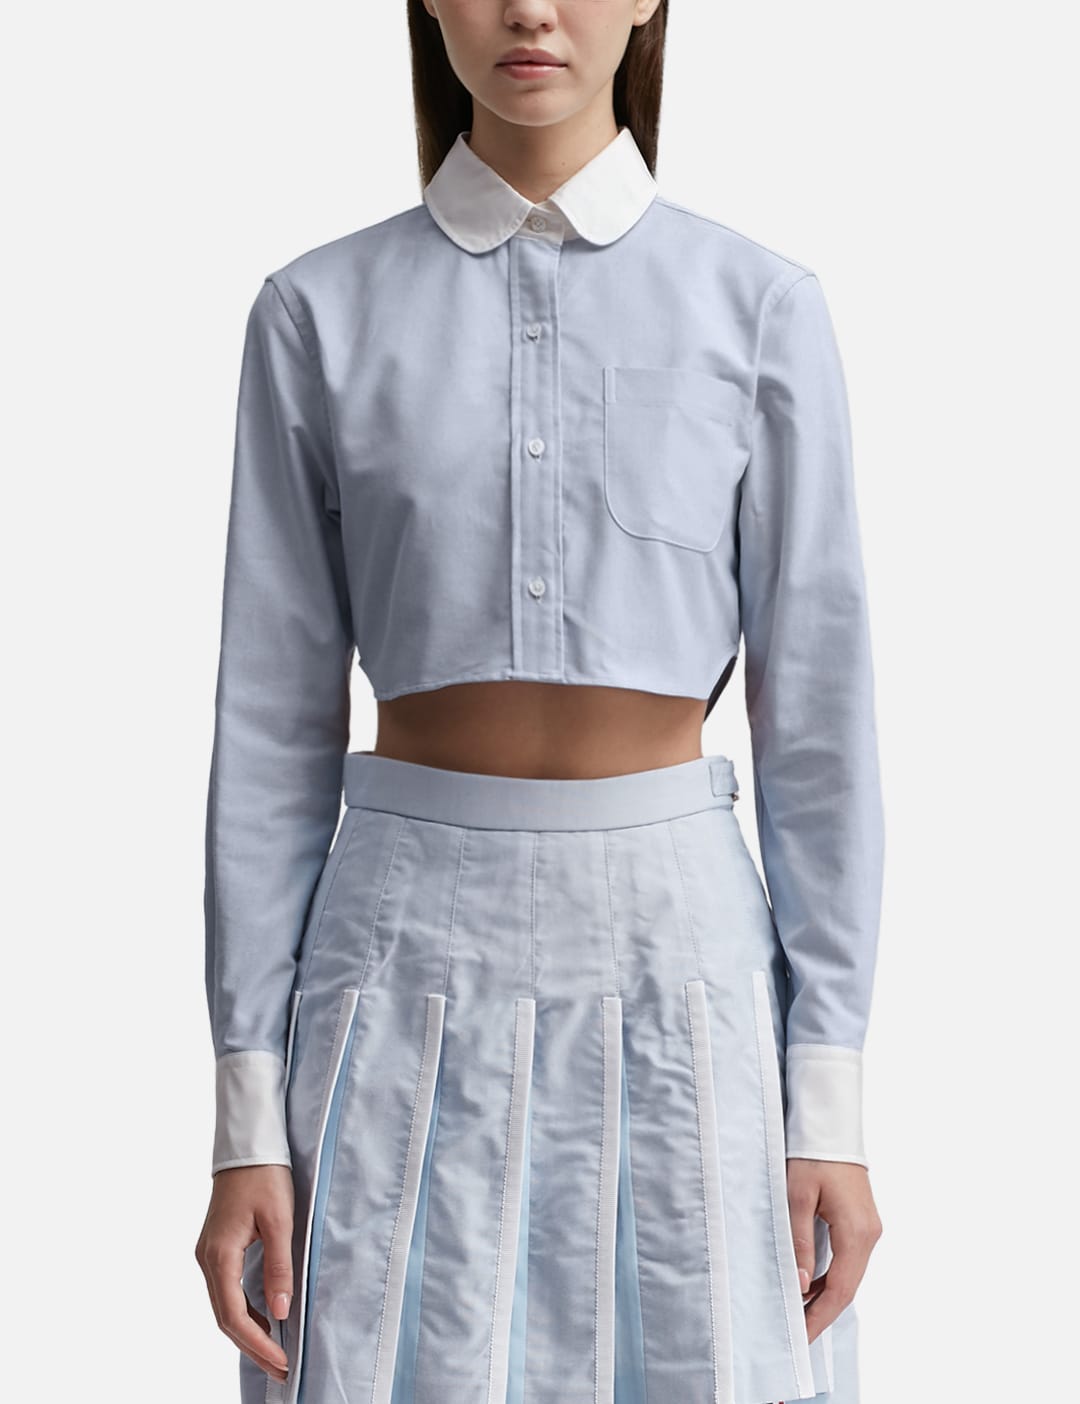 Thom Browne   Classic Cropped Round Collar Shirt   HBX   Globally